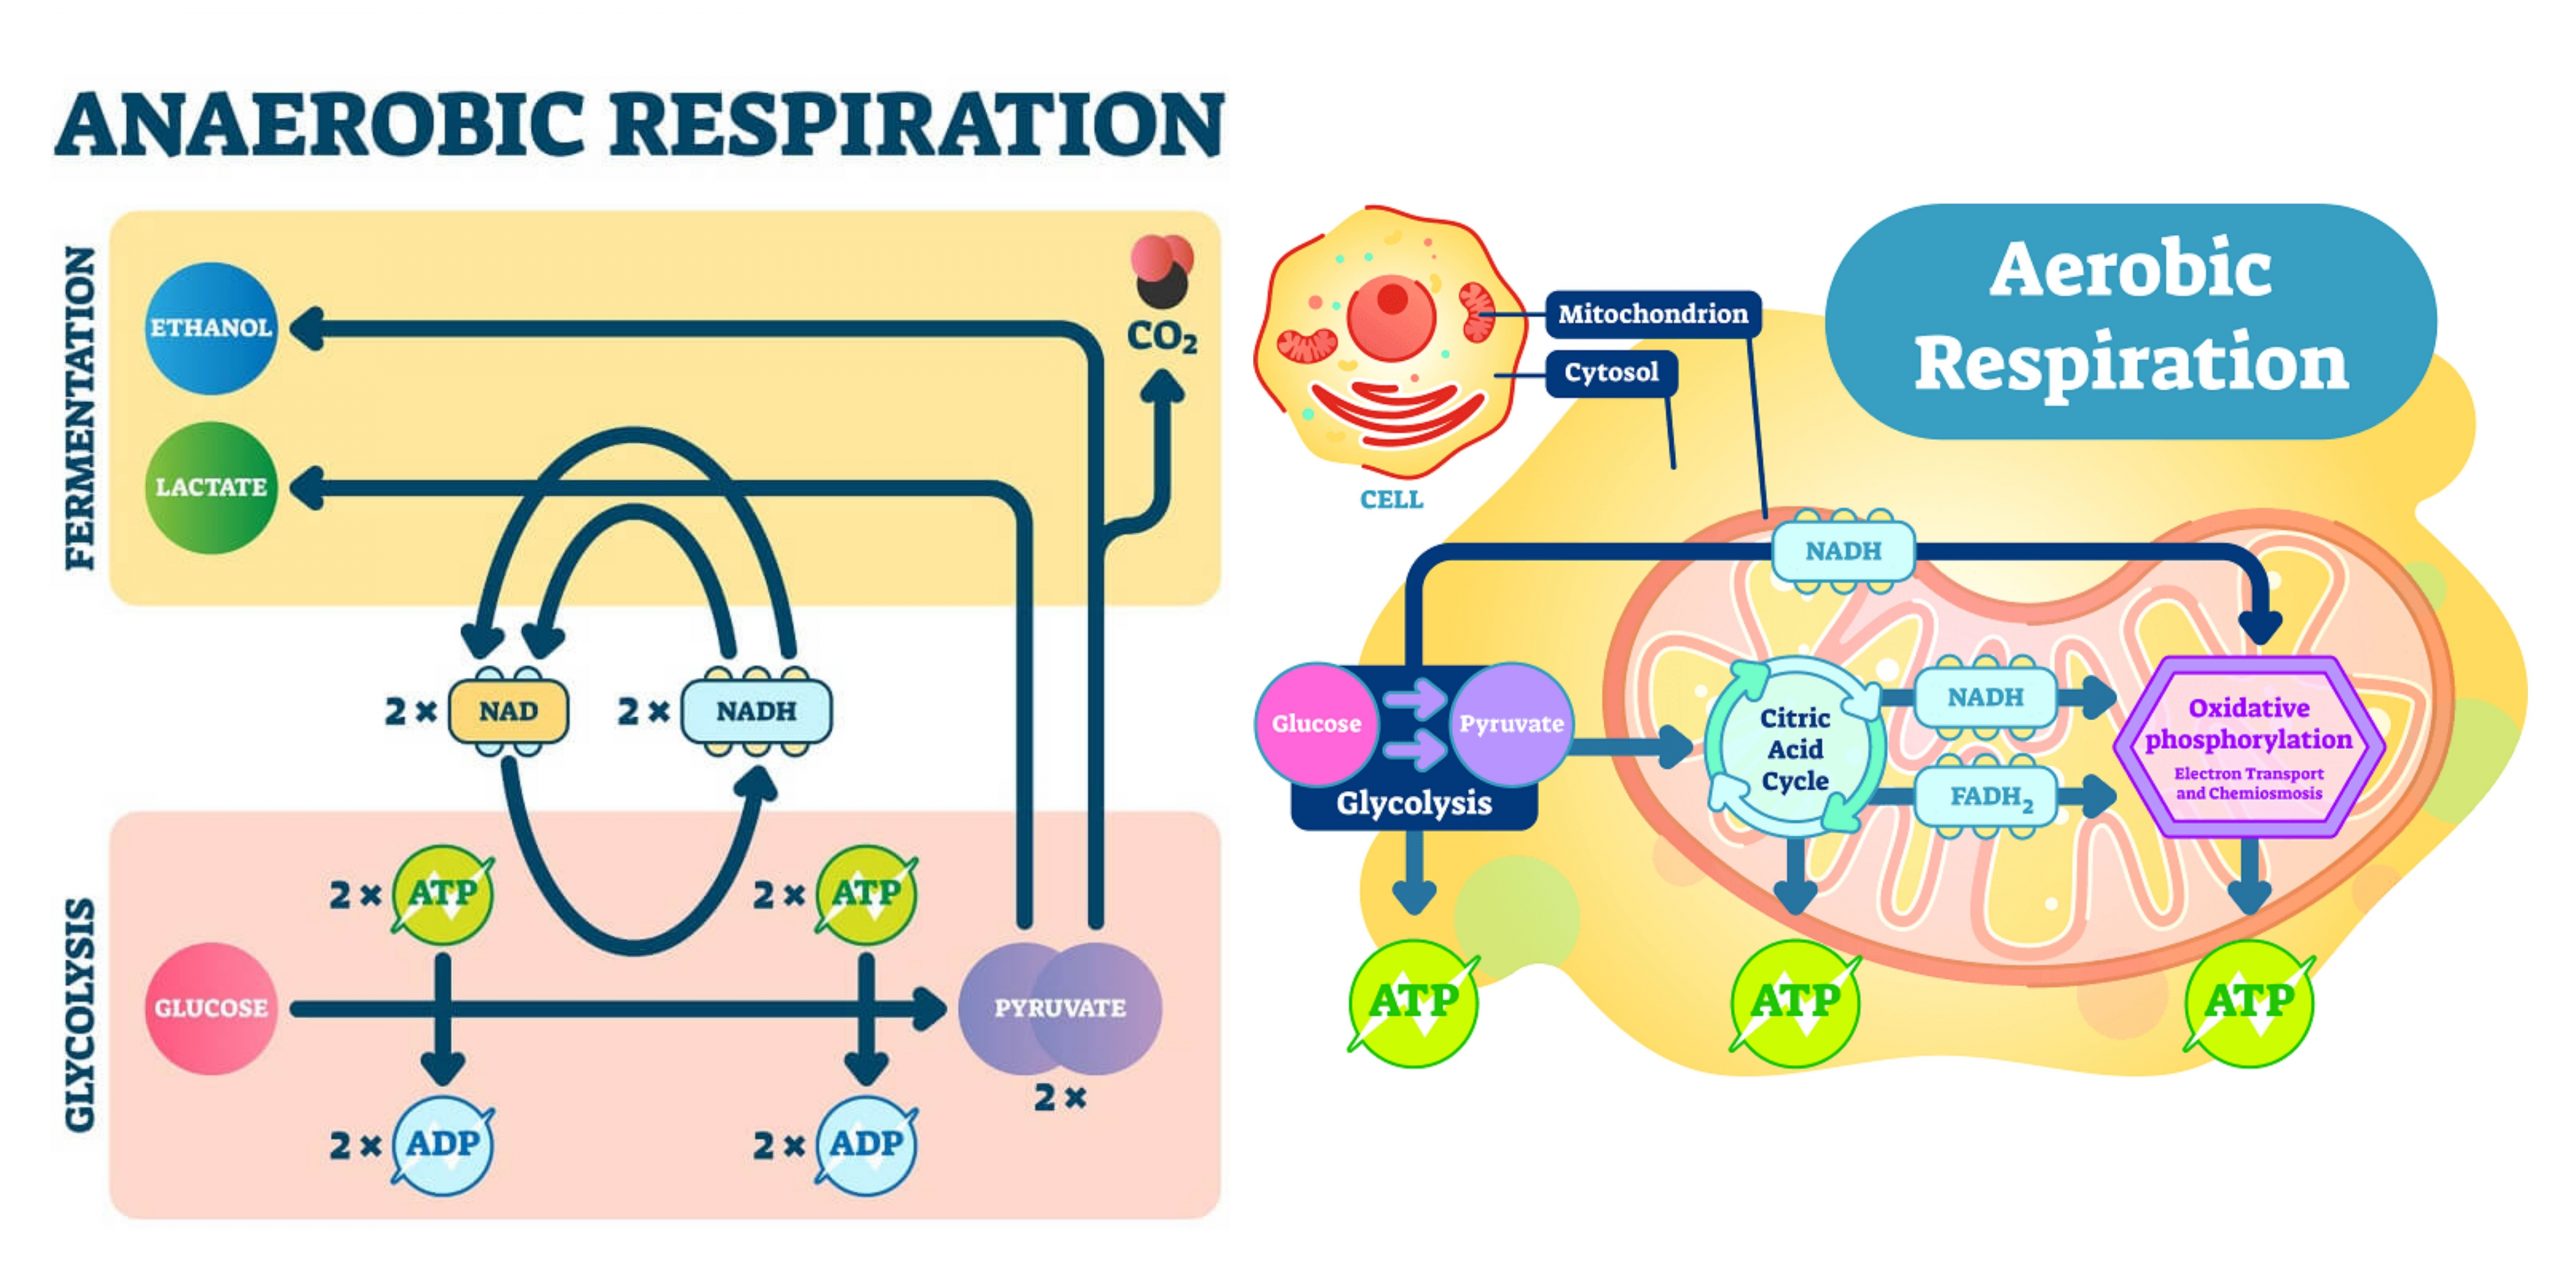 total atp produced in aerobic respiration